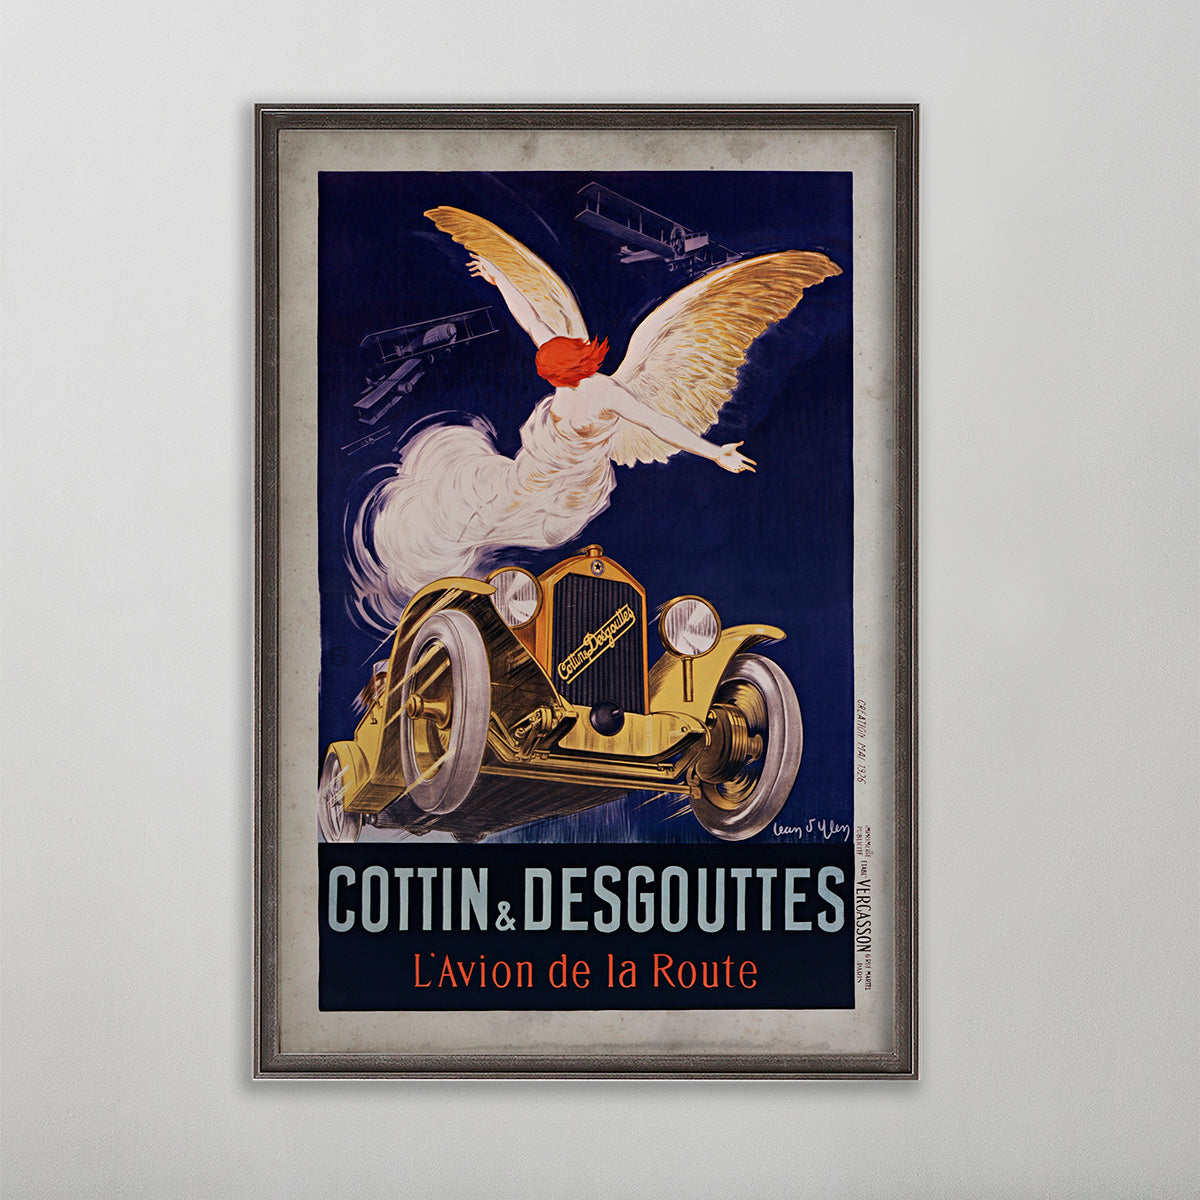 Cottin & Desgouttes vintage poster wall art by leonetto cappiello. Angel flying over a car.